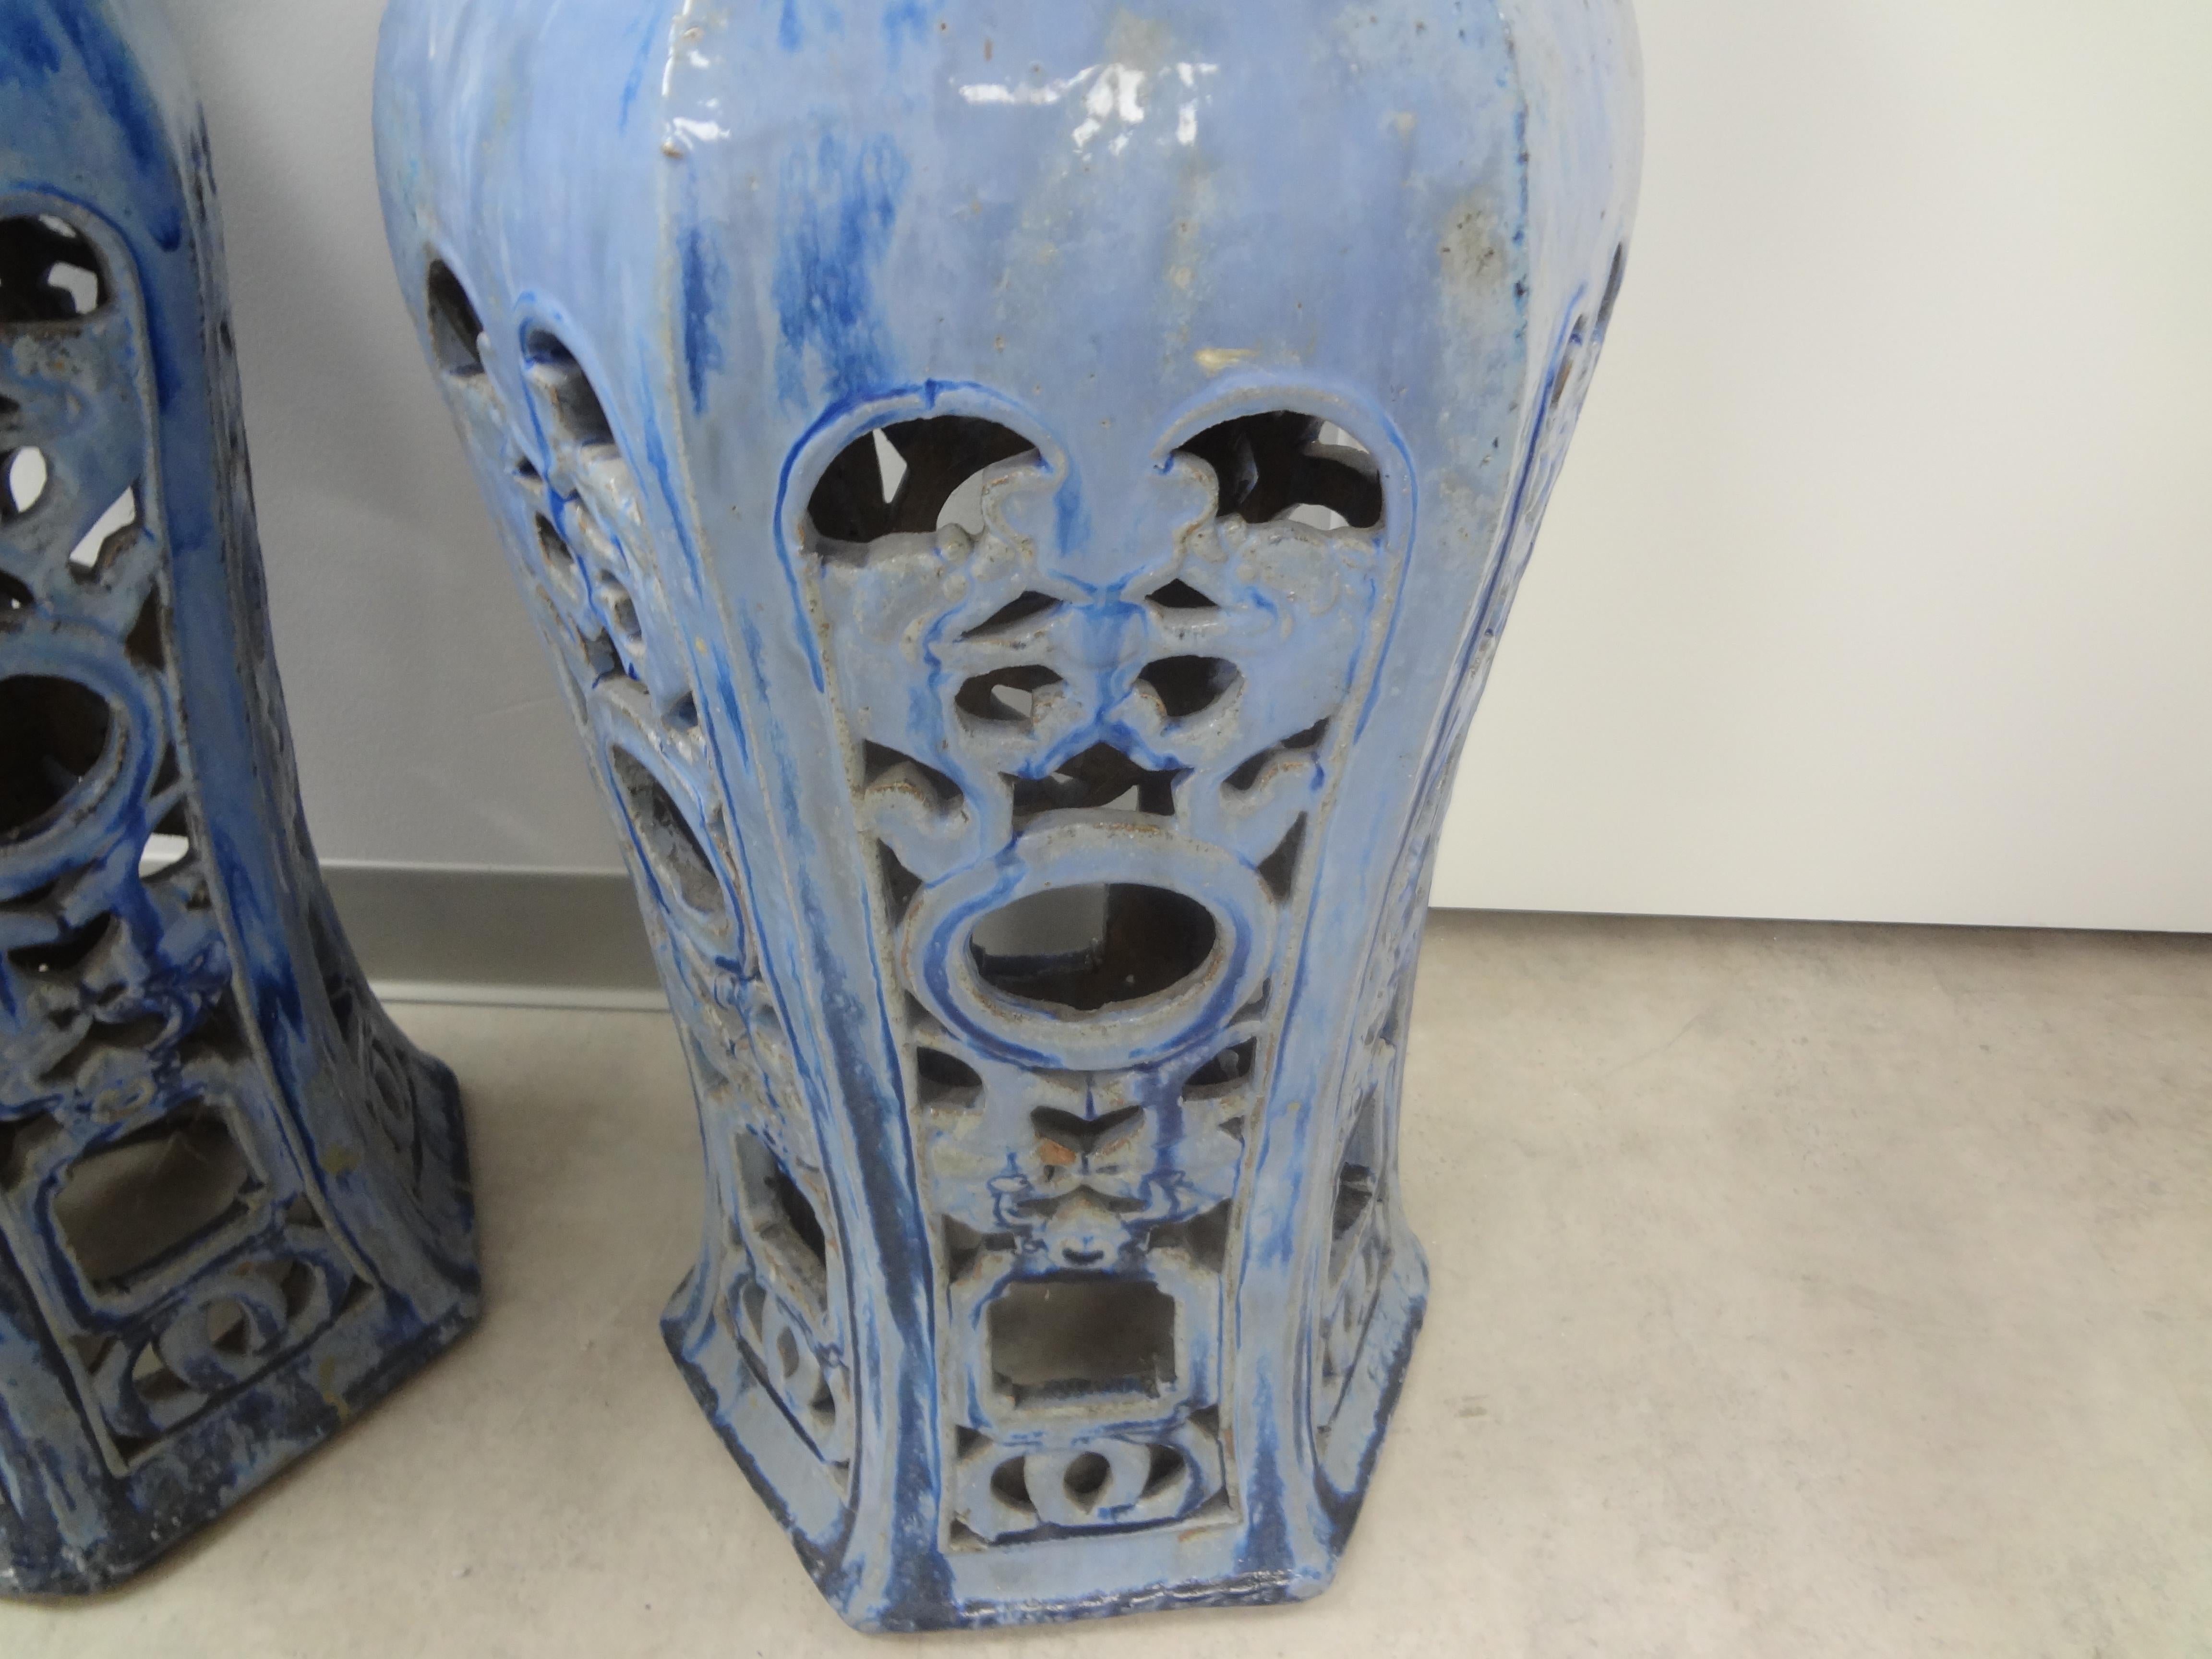 Pair of Early 20th Century Chinese Glazed Terra Cotta Pedestals or Stands In Good Condition For Sale In Houston, TX